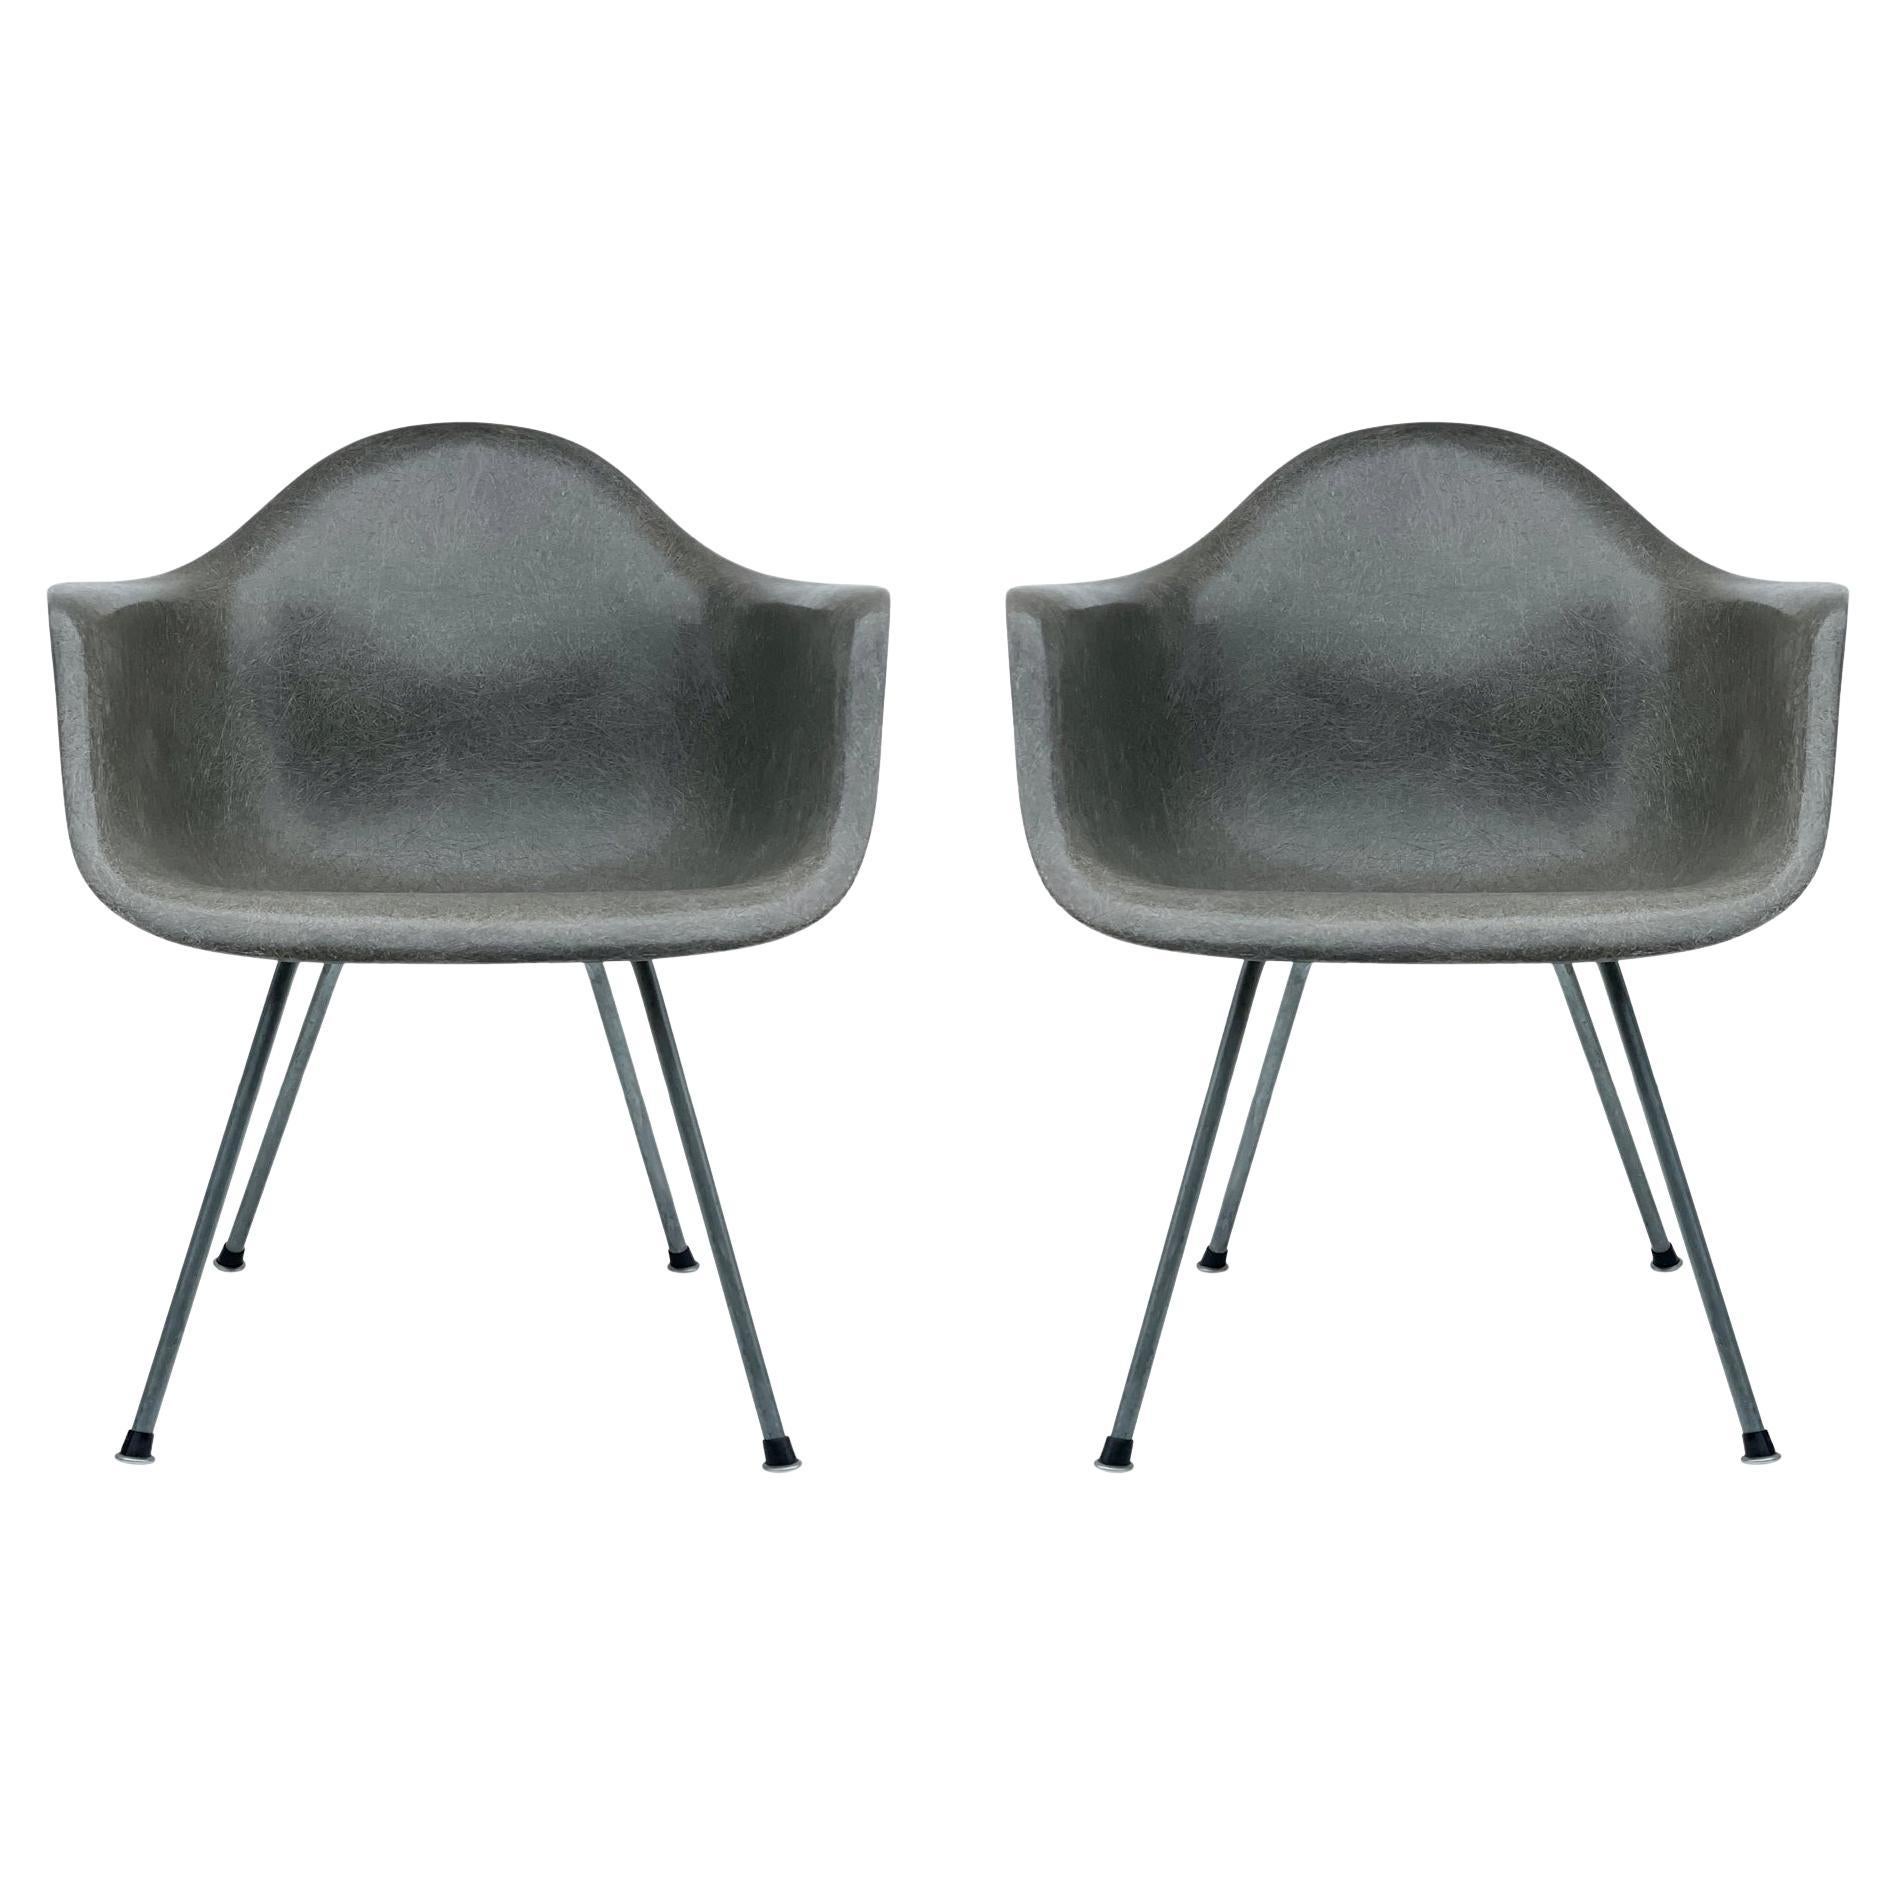 Pair of Early 2nd Generation Eames Fiberglass LAX Lounge Chairs in Elephant Gray